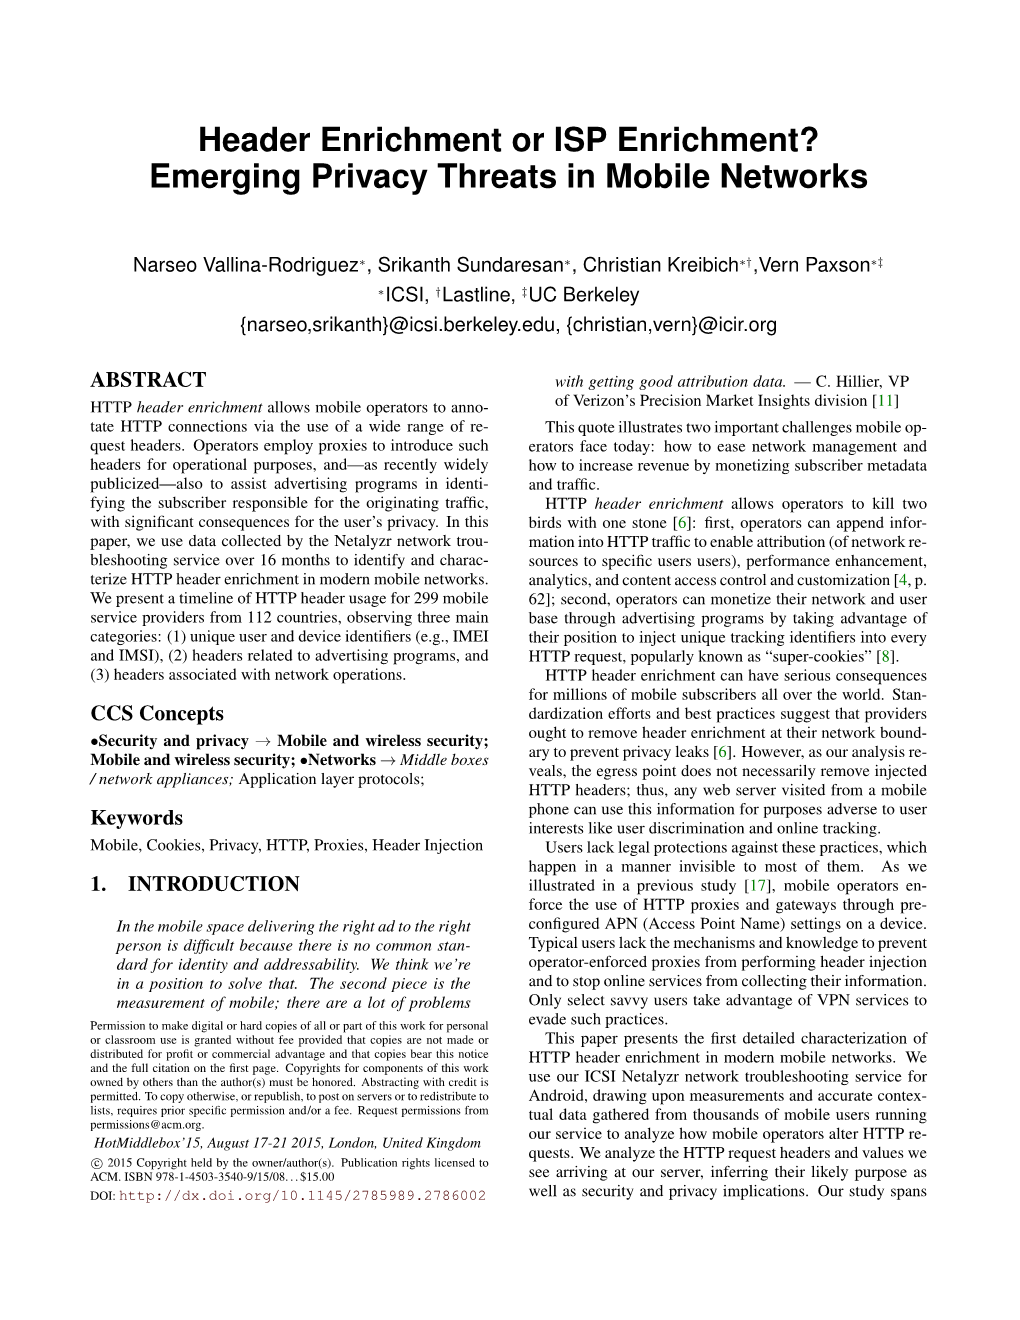 Header Enrichment Or ISP Enrichment? Emerging Privacy Threats in Mobile Networks